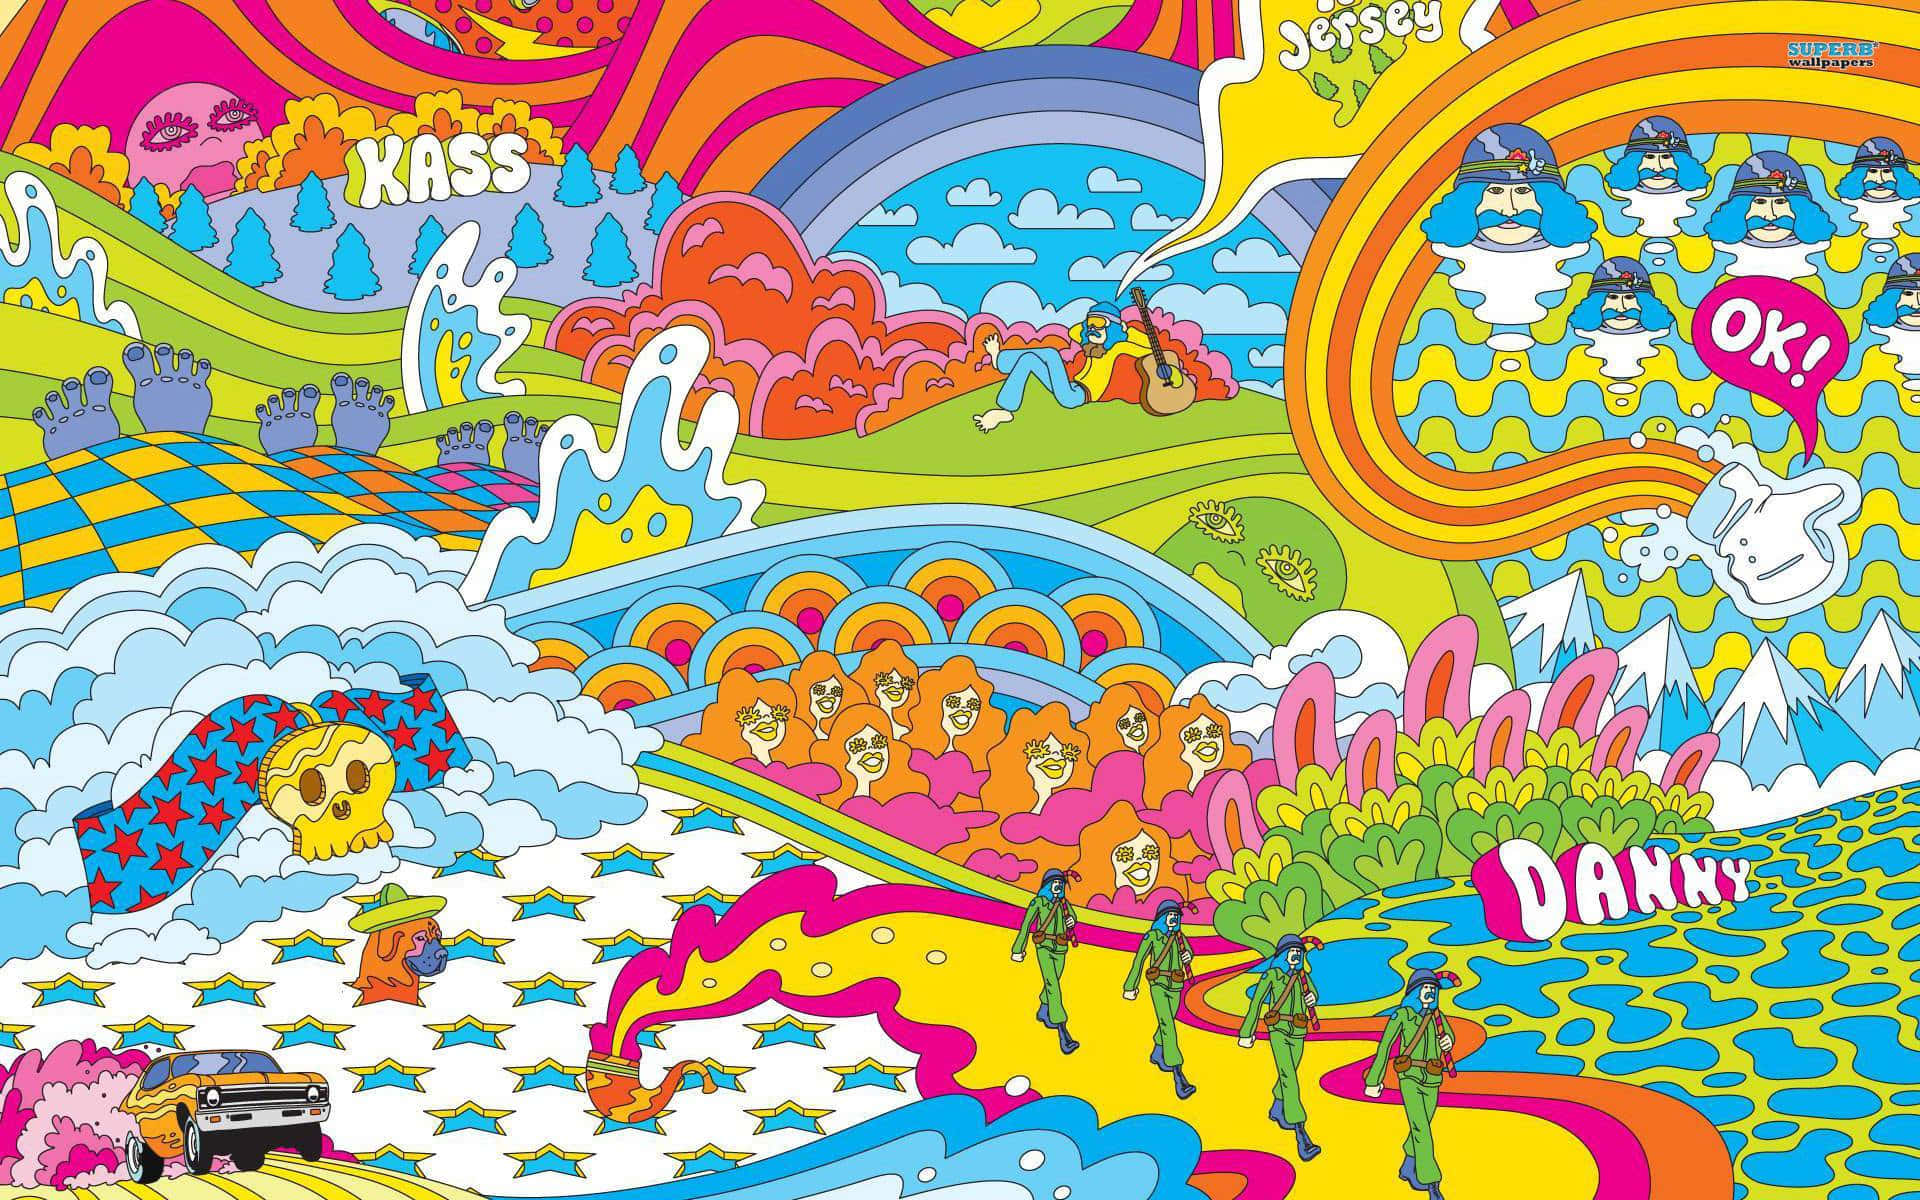 Retro Groovy And Psychedelic Hippie Digital Artwork Wallpaper